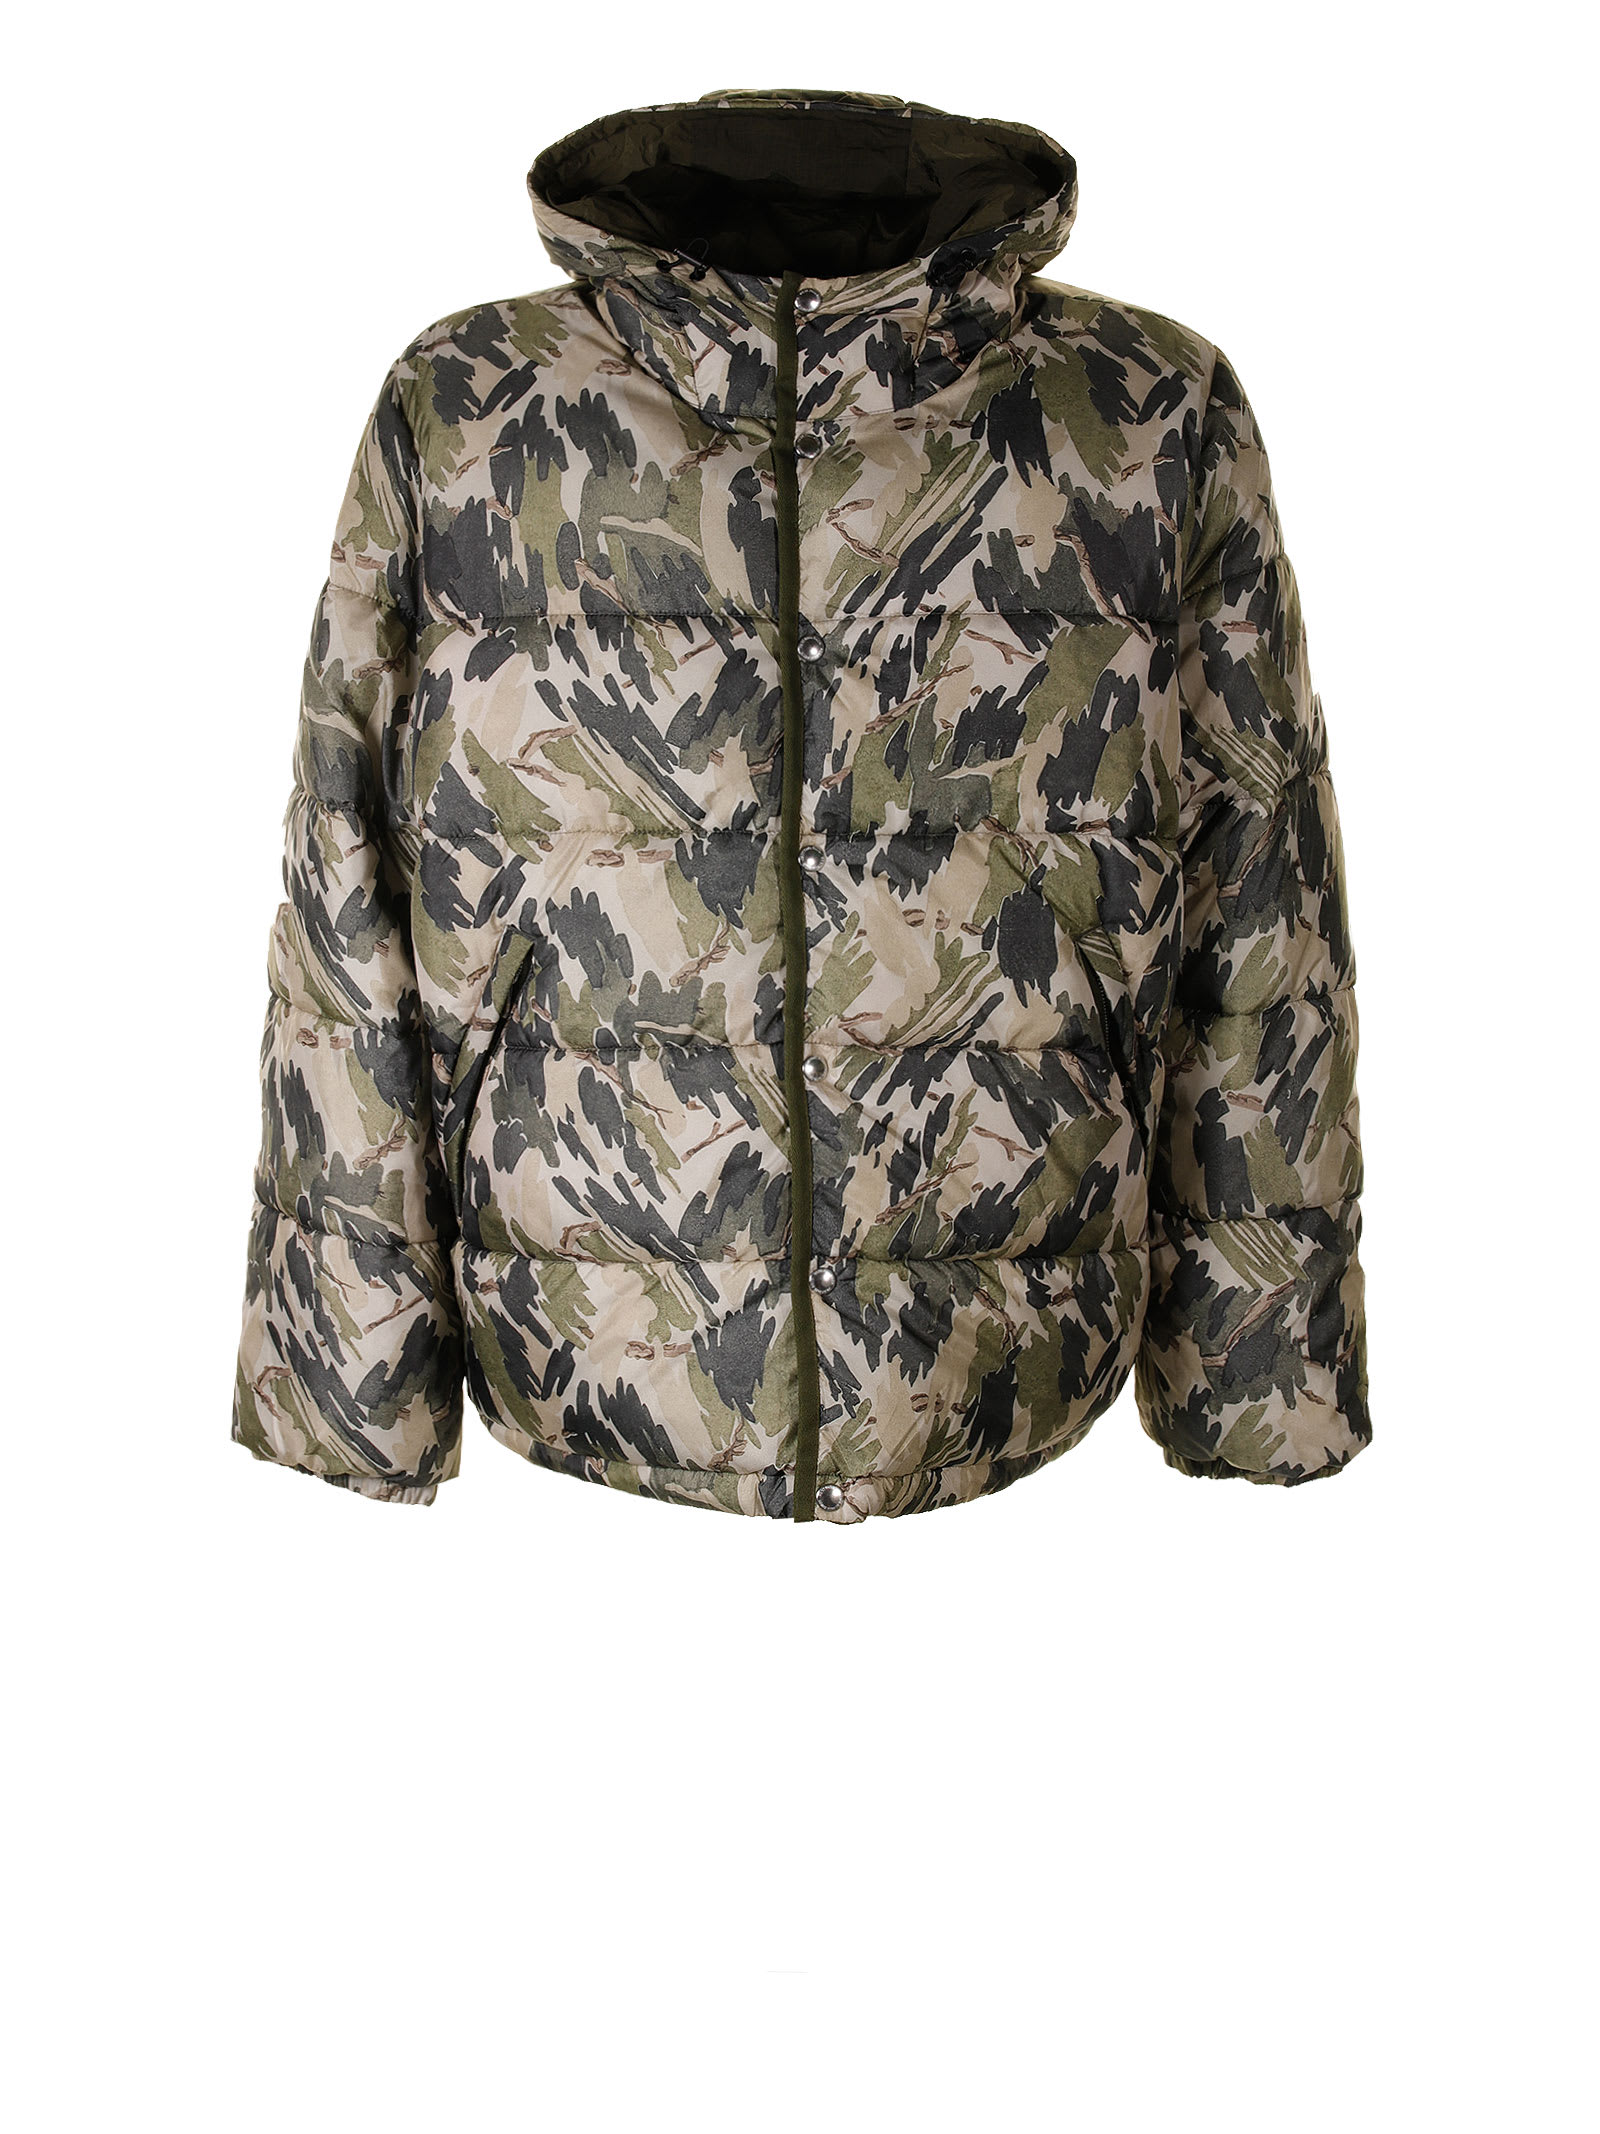 PAUL SMITH MILITARY DOWN JACKET WITH HOOD